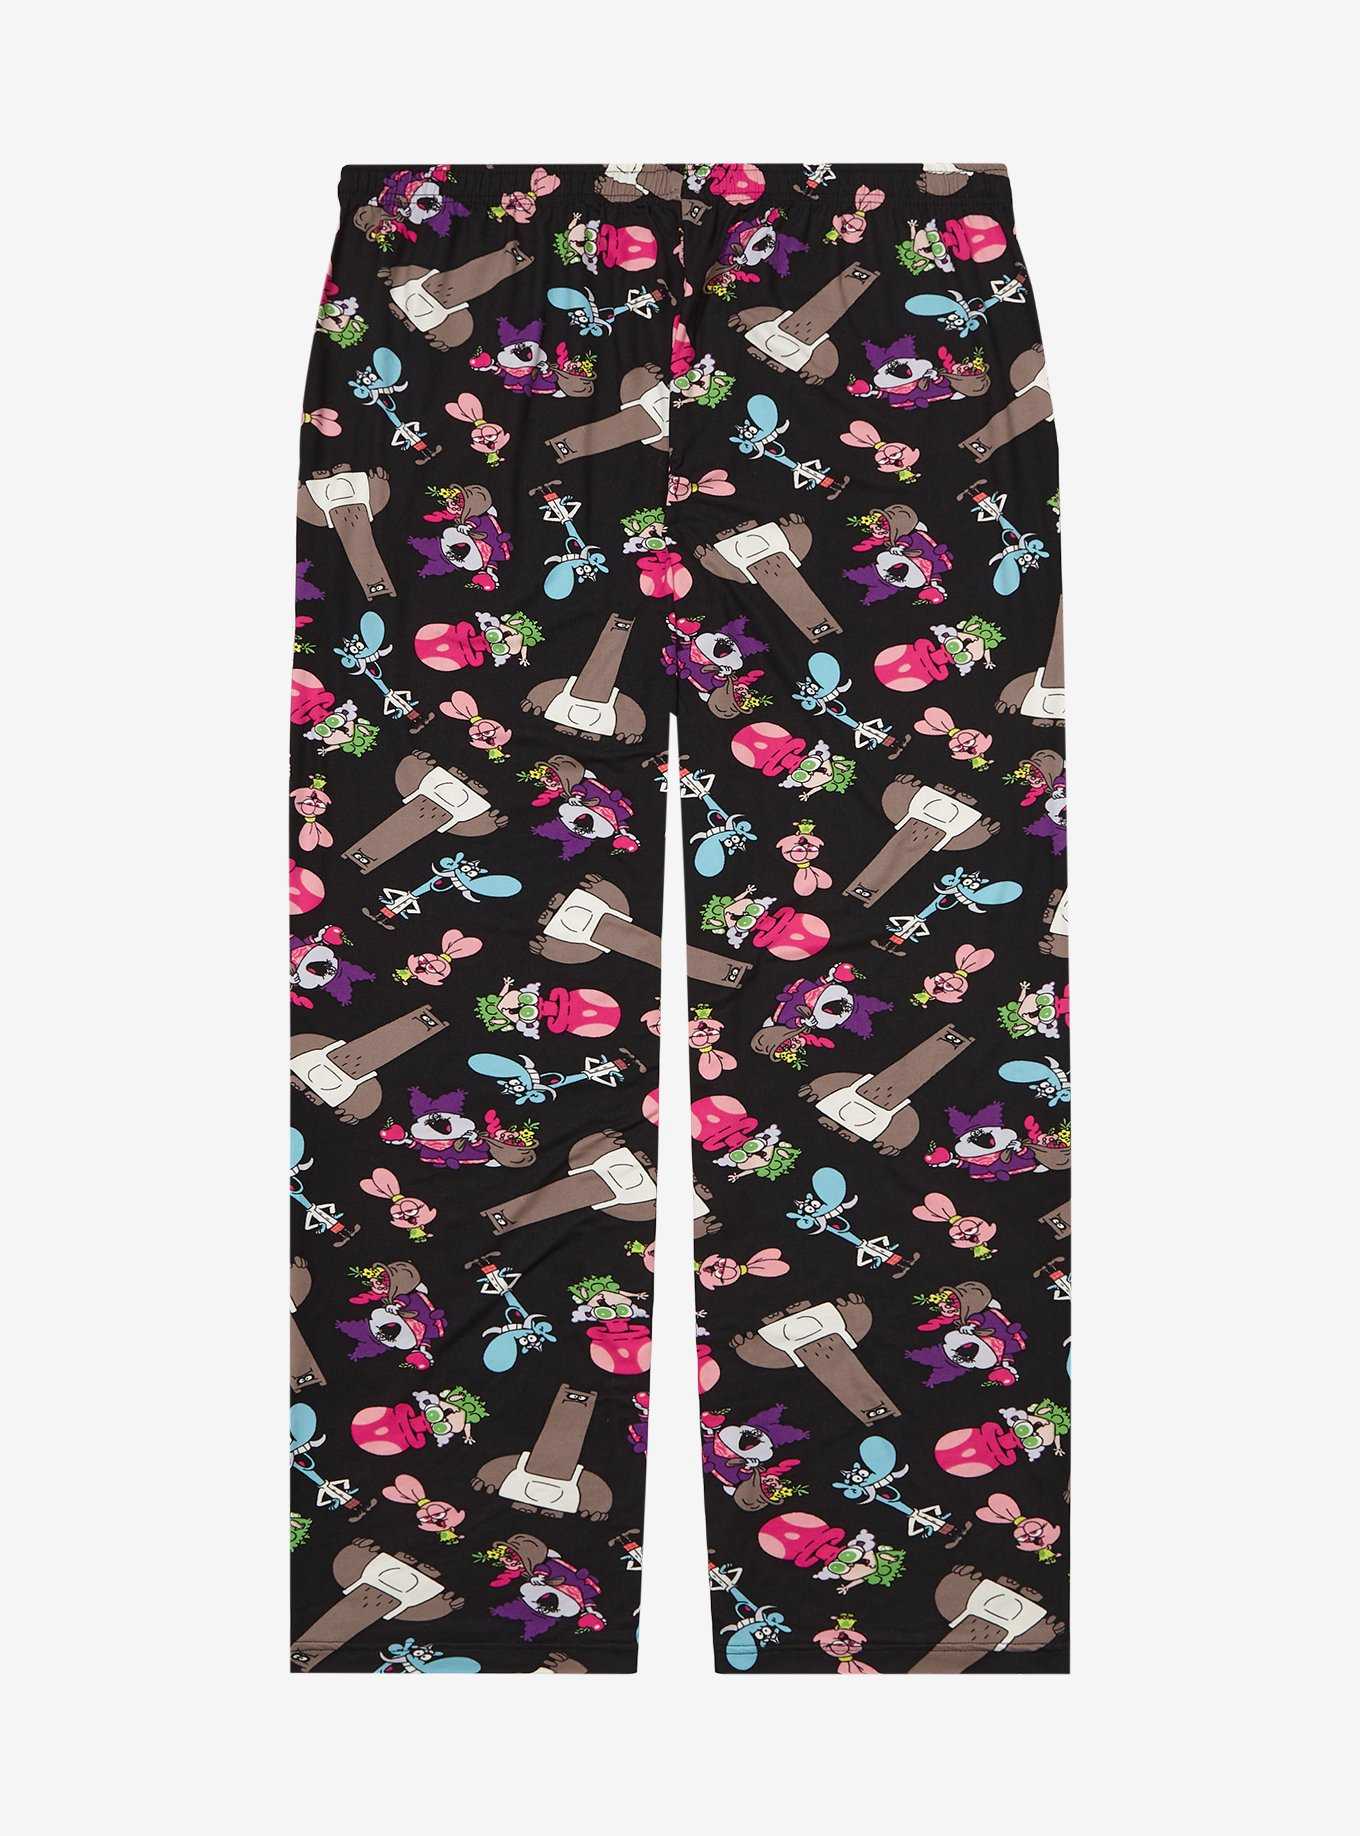 Chowder Characters Allover Print Women's Plus Size Sleep Pants - BoxLunch Exclusive, , hi-res